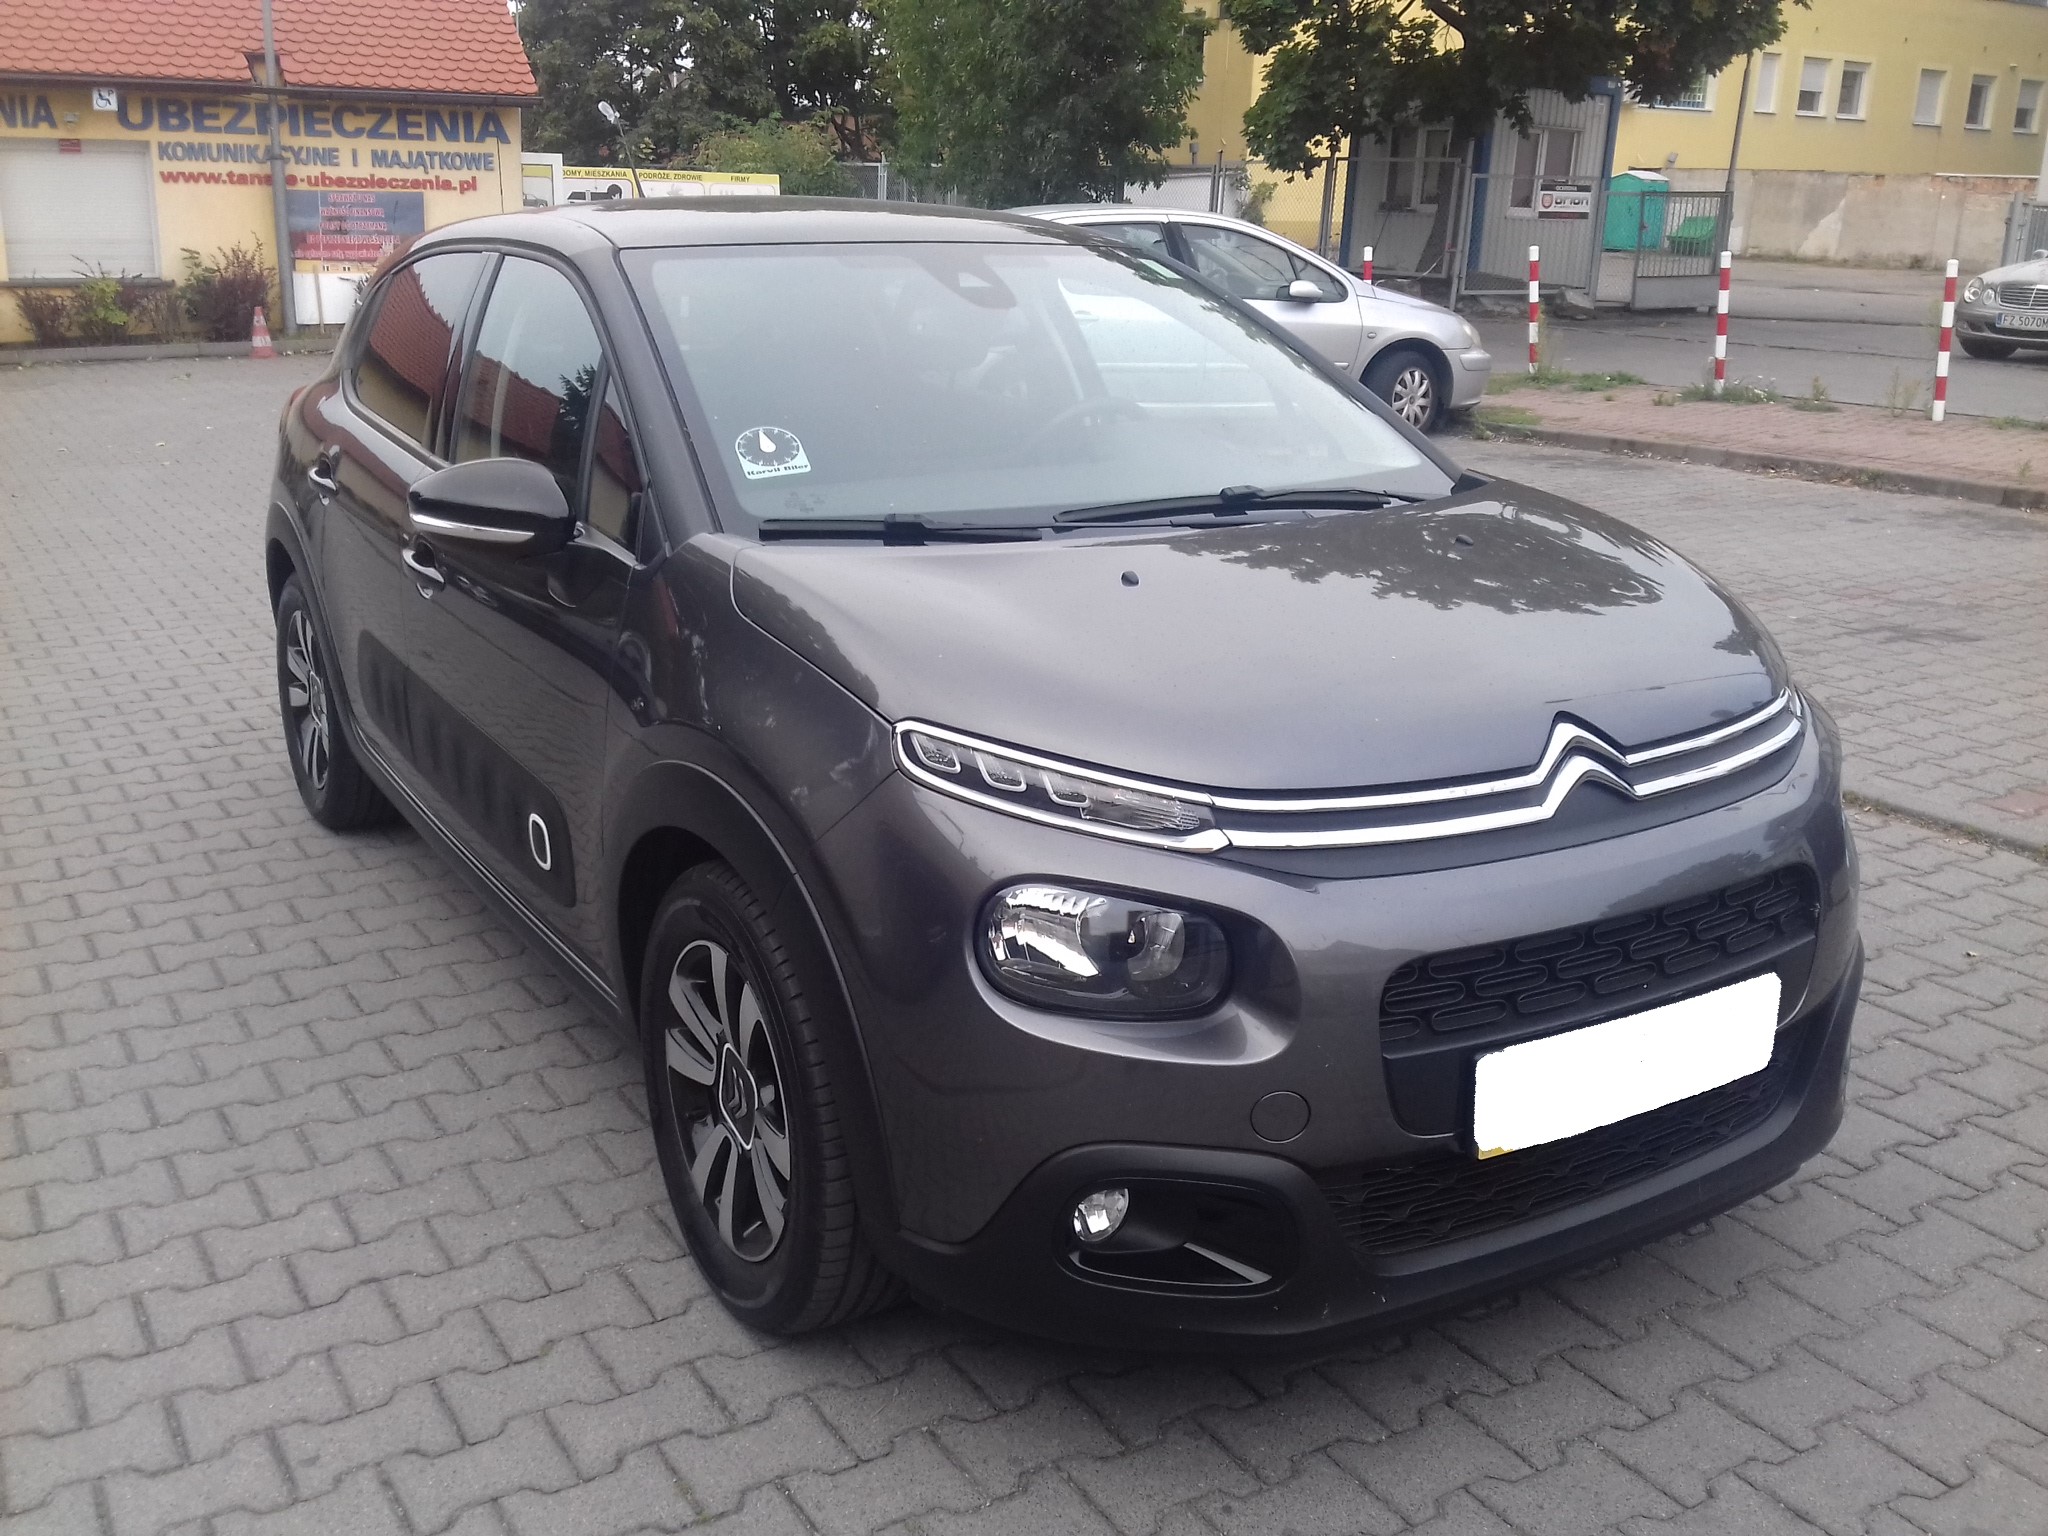 Citroën C3 Puretech (2016-) - Where Is Vin Number | Find Chassis Number